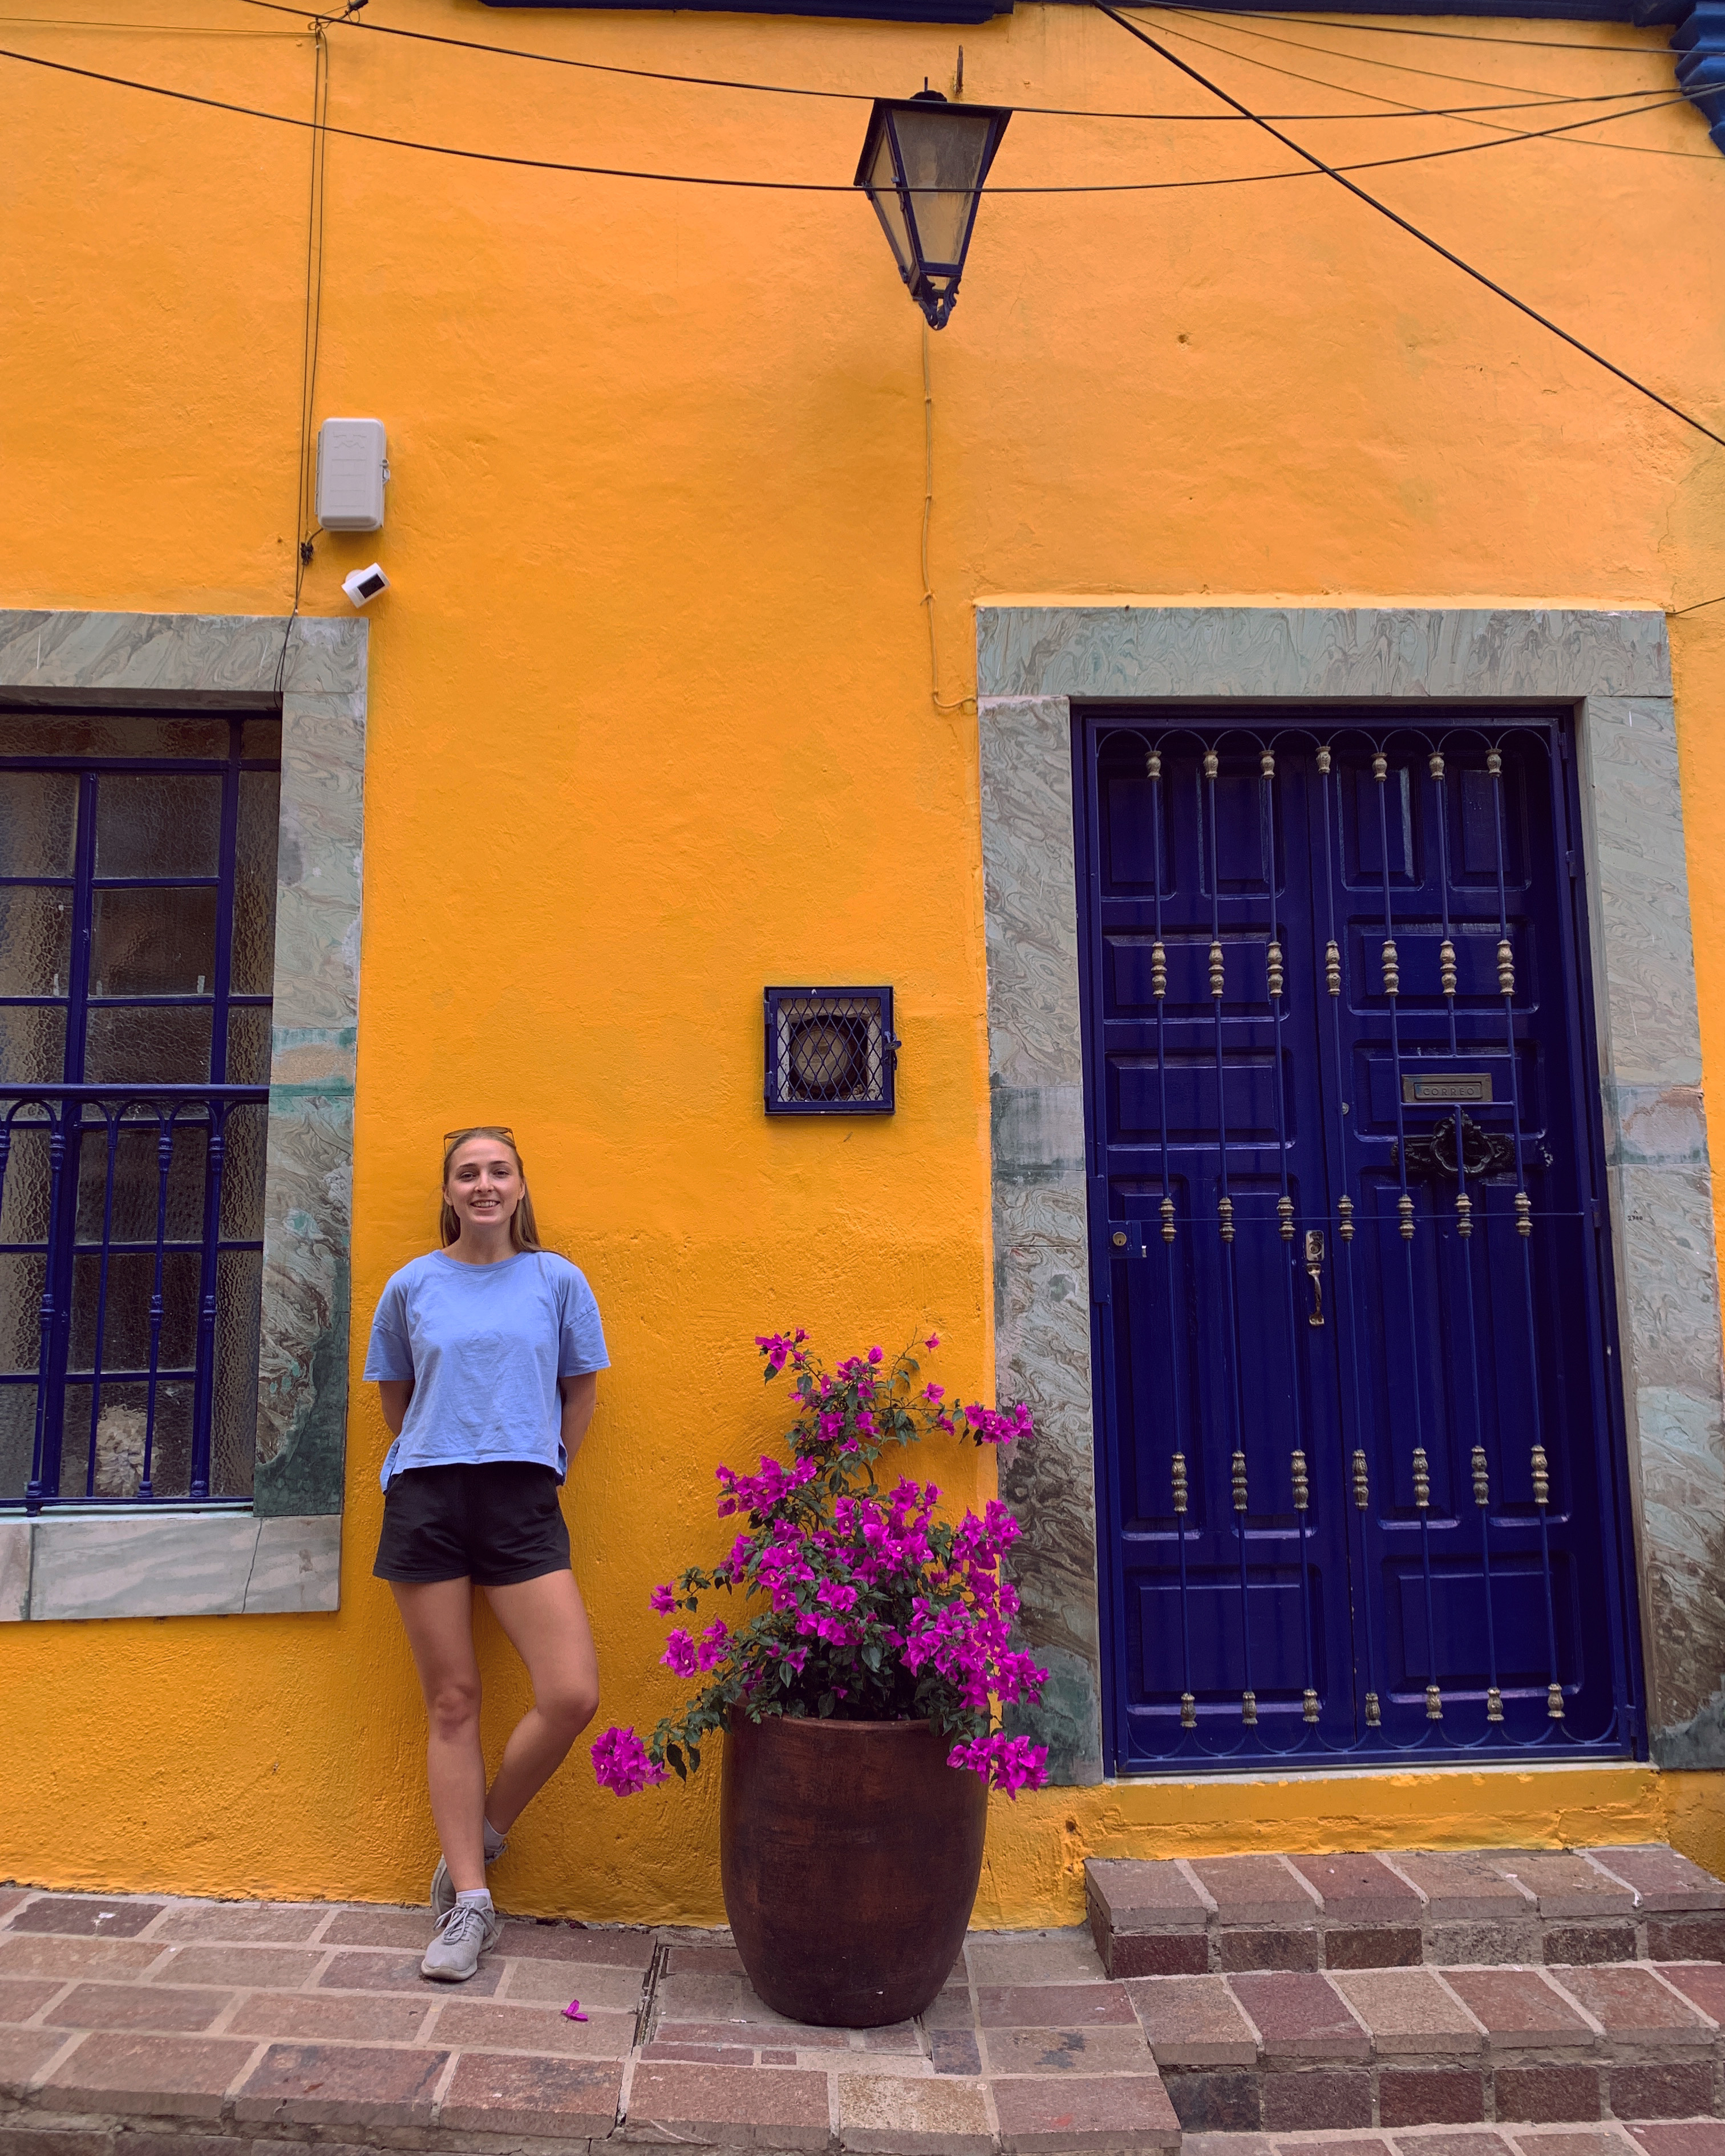 Two Days Among The Colourful Streets of Guanajuato, Mexico